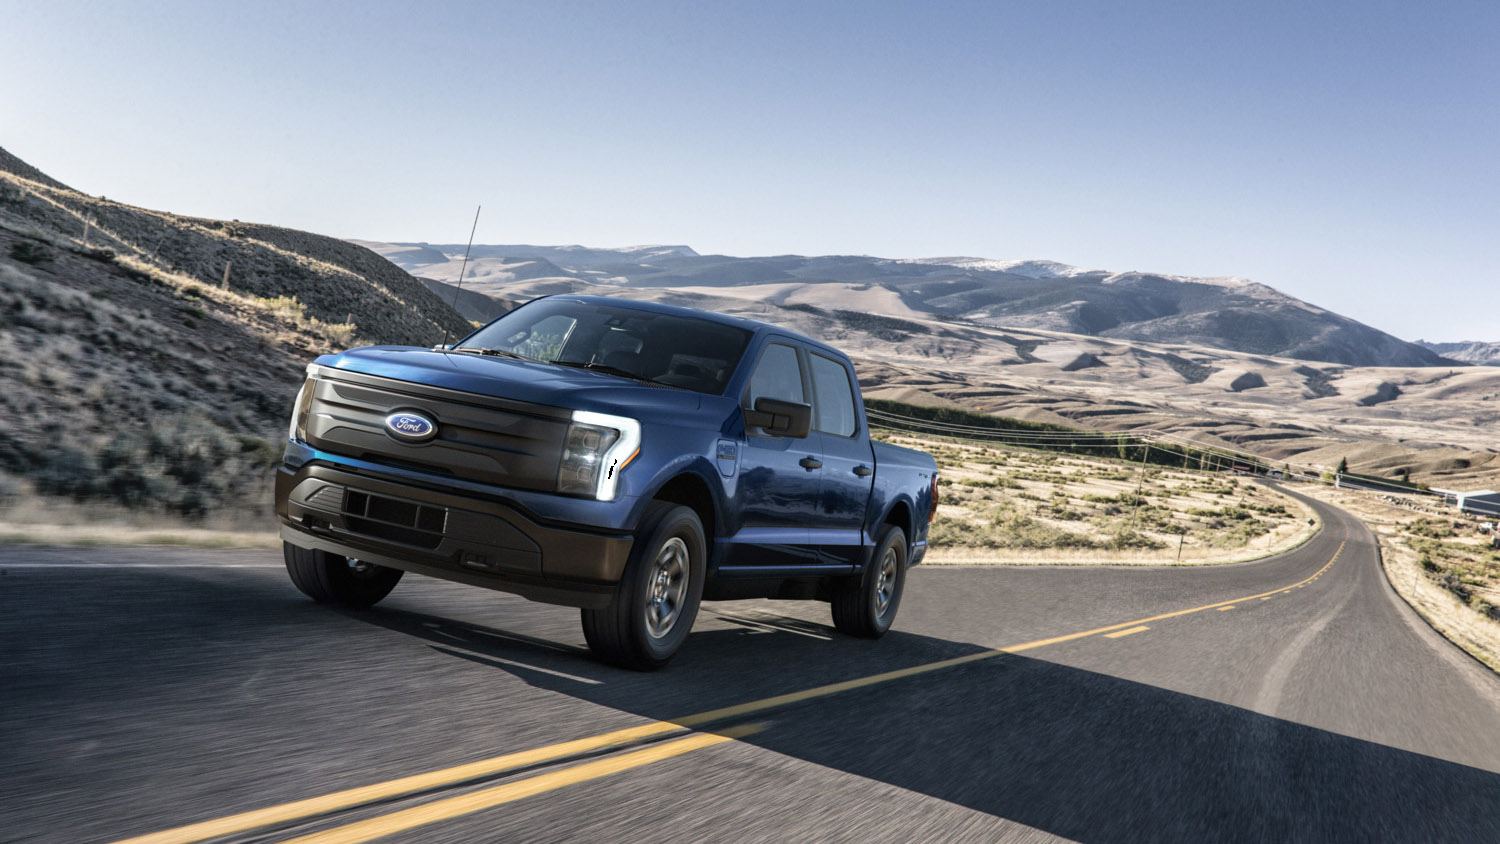 Ford advises dealerships to not apply markups to F-150 Lightning customers